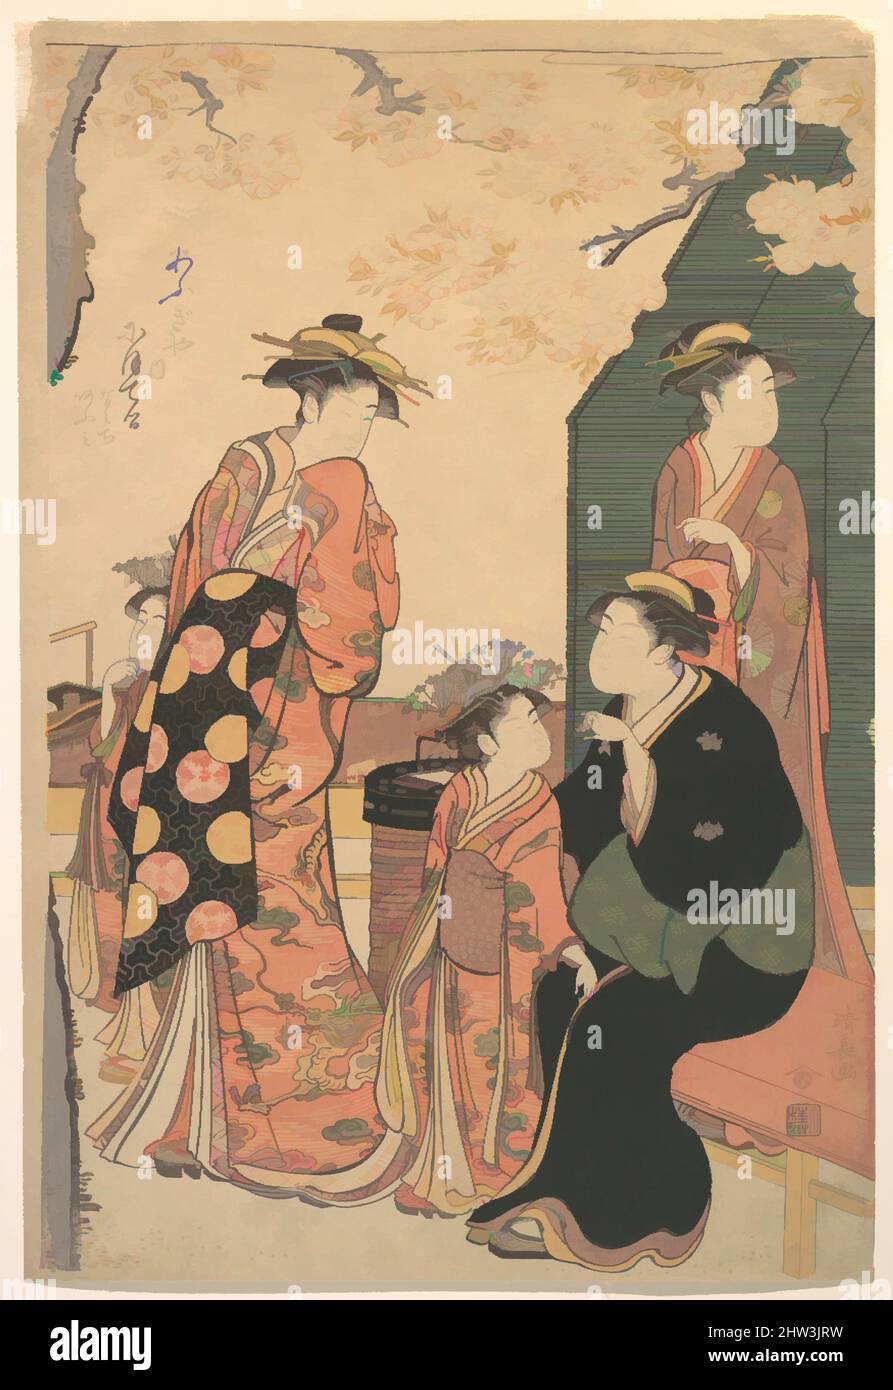 Art inspired by Portrait of the Courtesan Nioteru of the Ogiya, with Her Two Attendants Namiji and Aō-mi, Edo period (1615–1868), ca. 1785, Japan, Polychrome woodblock print; ink and color on paper, H. 15 5/16 in. (38.9 cm); W. 10 3/8 in. (26.4 cm), Prints, Torii Kiyonaga (Japanese, Classic works modernized by Artotop with a splash of modernity. Shapes, color and value, eye-catching visual impact on art. Emotions through freedom of artworks in a contemporary way. A timeless message pursuing a wildly creative new direction. Artists turning to the digital medium and creating the Artotop NFT Stock Photo